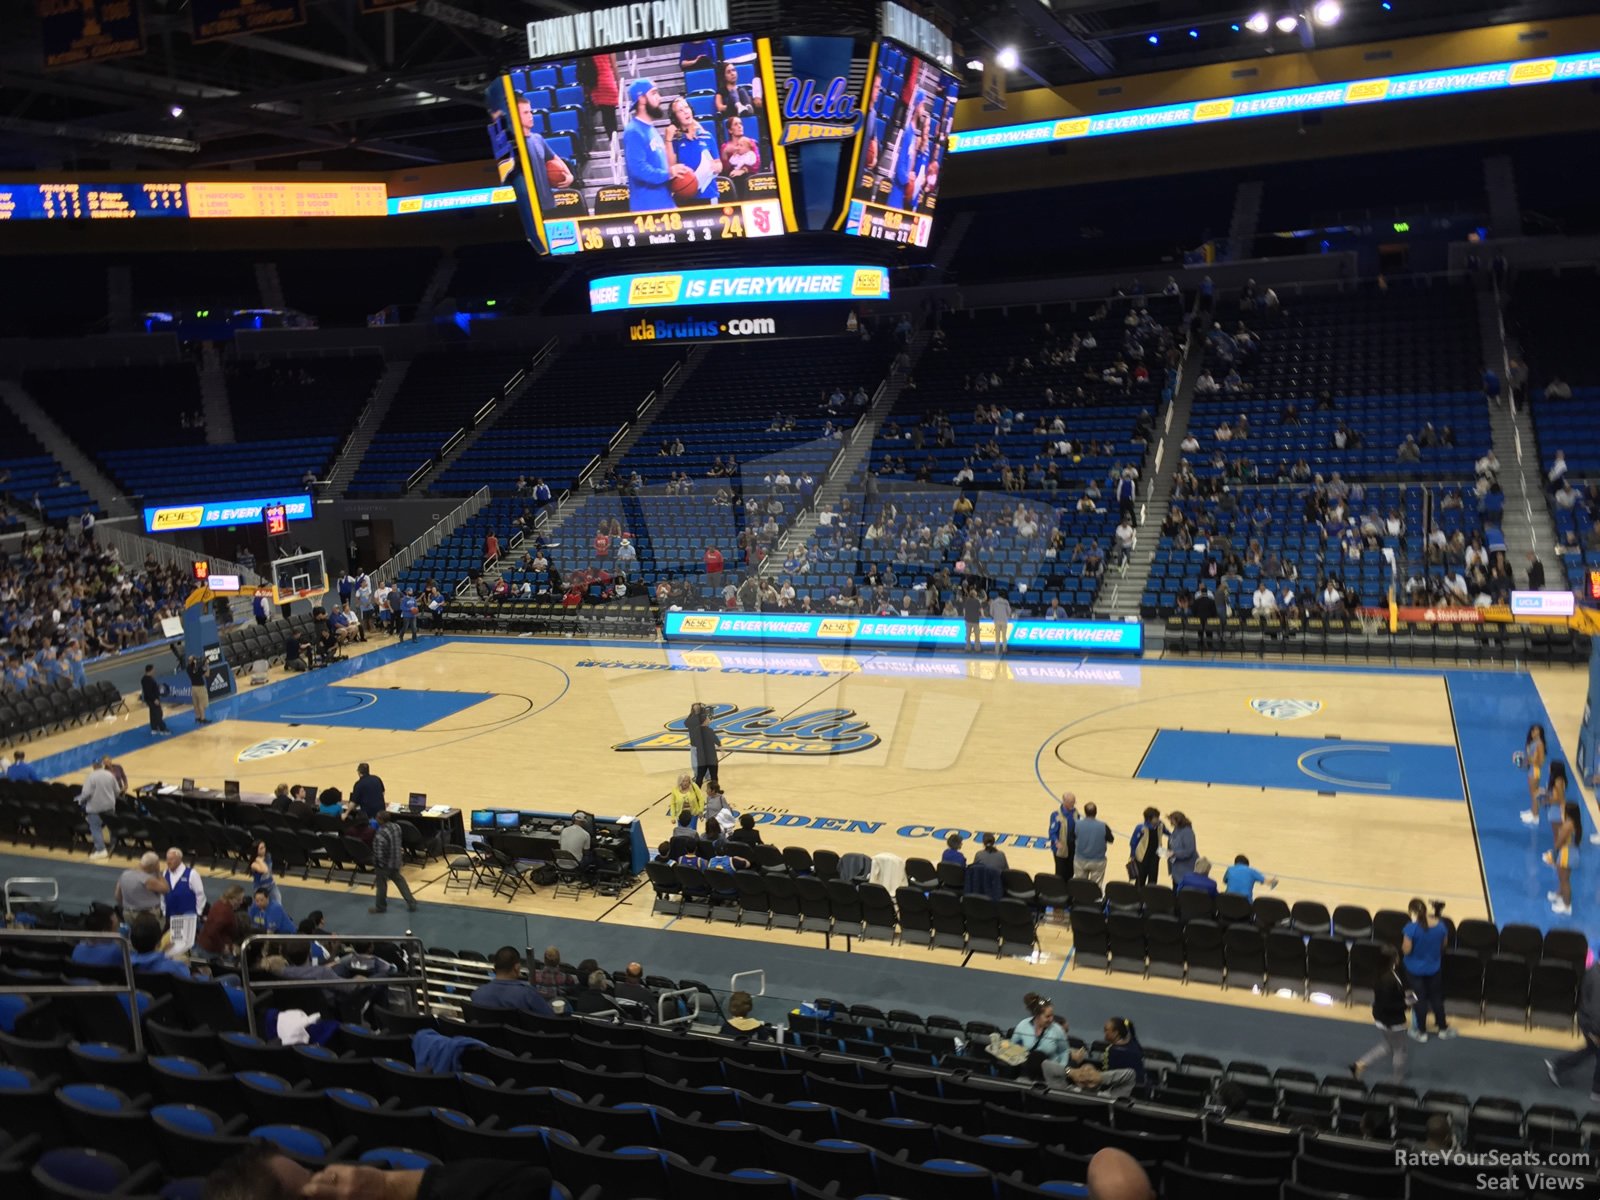 section 114, row 3 seat view  - pauley pavilion